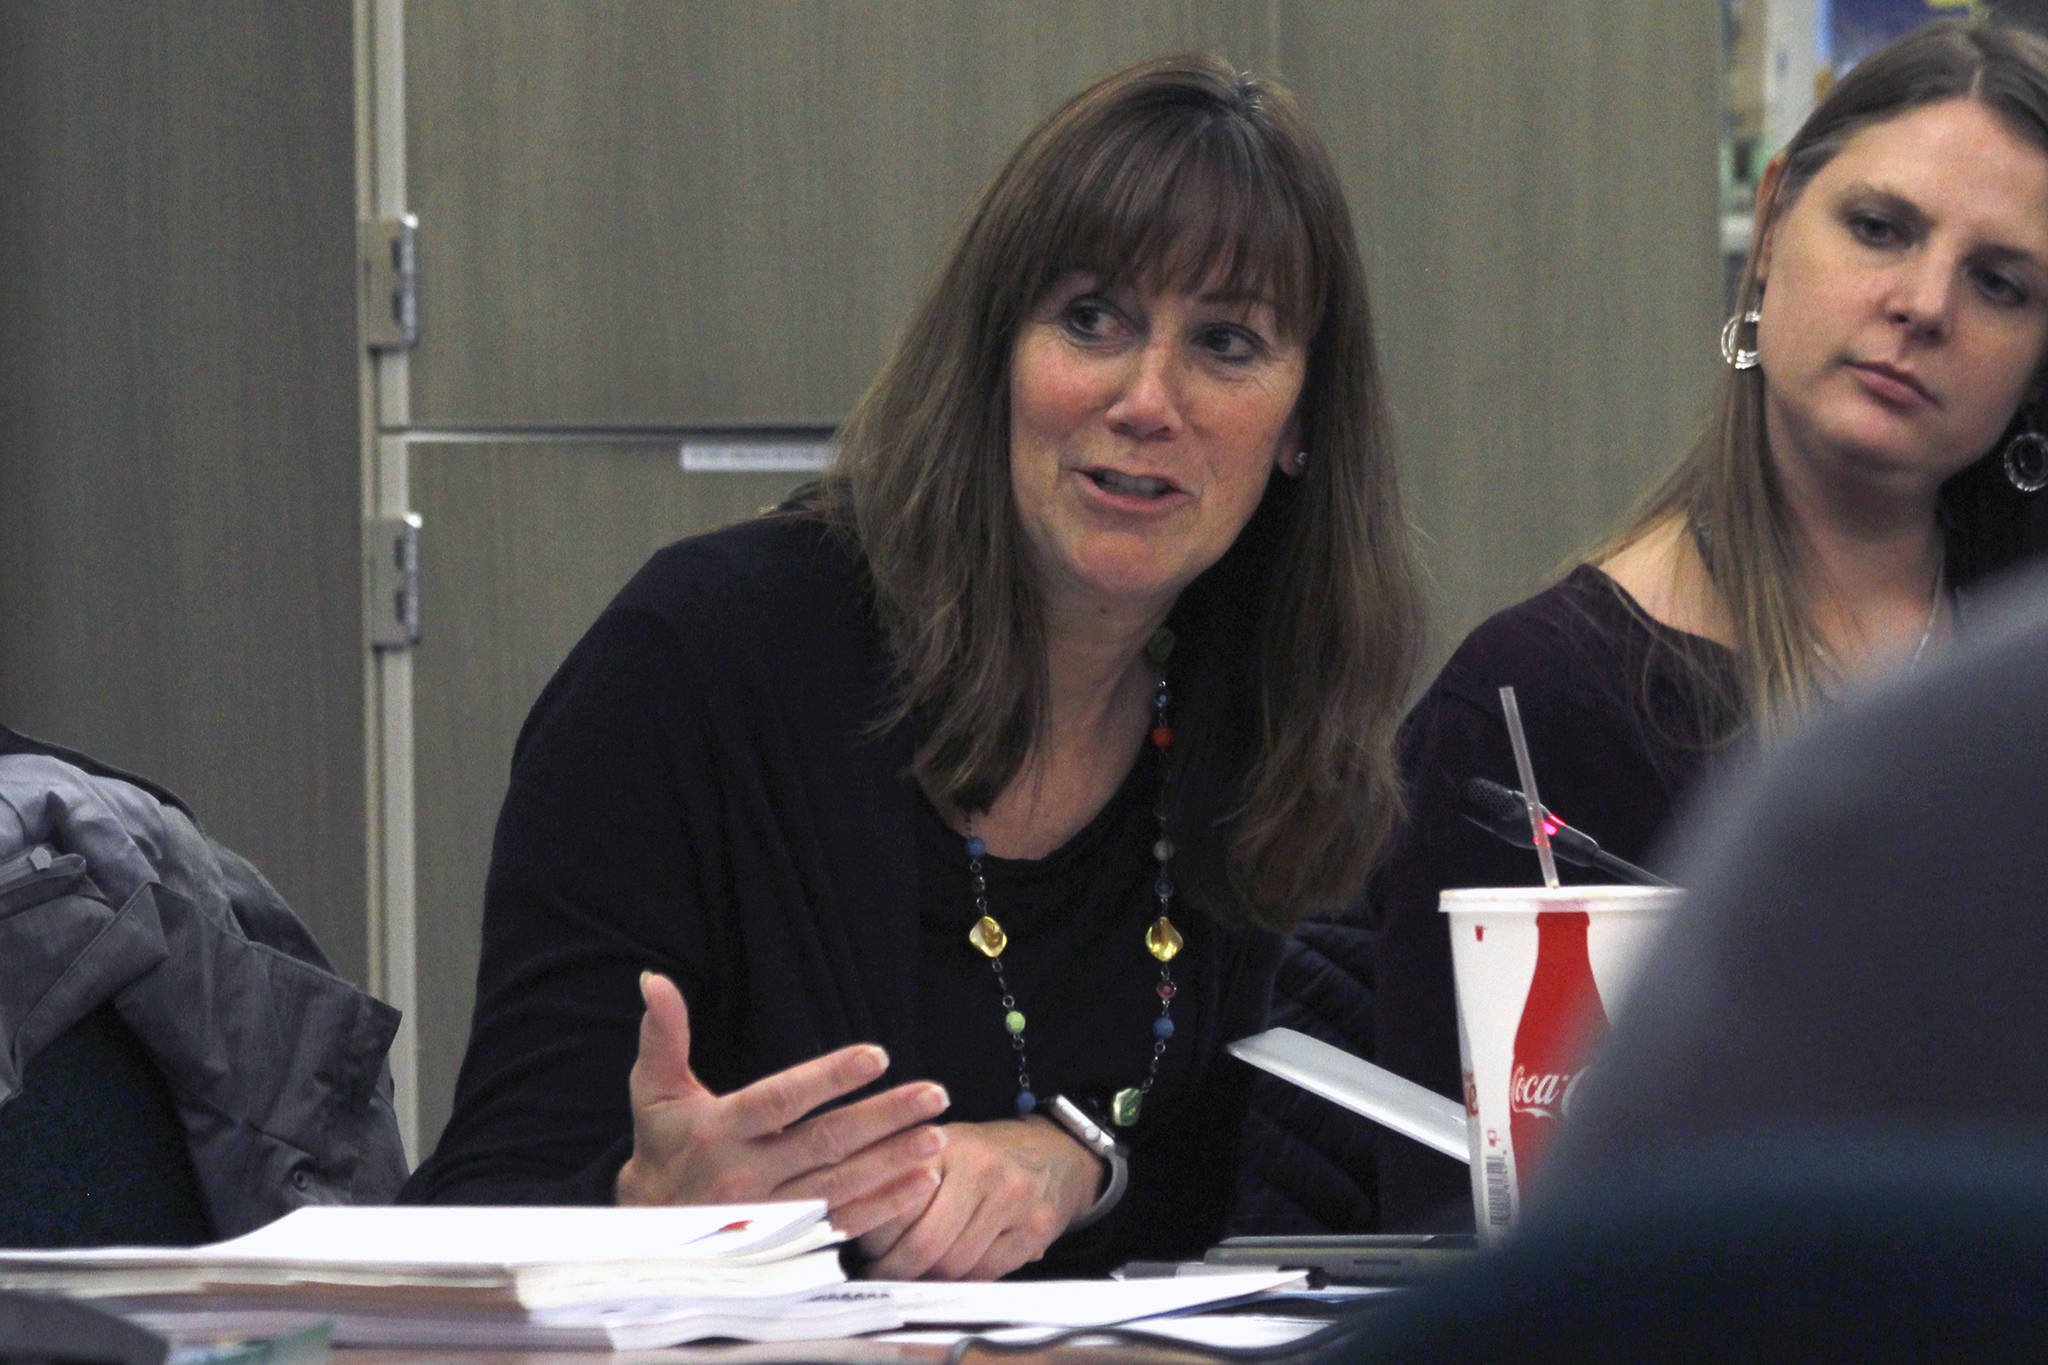 Juneau School District Superintendent Bridget Weiss speaks during a Board of Education meeting on Tuesday, Nov. 13, 2018. Weiss is currently the interim superintendent, and the board members discussed next steps for selecting a permanent superintendent at Tuesday’s meeting. (Alex McCarthy | Juneau Empire)